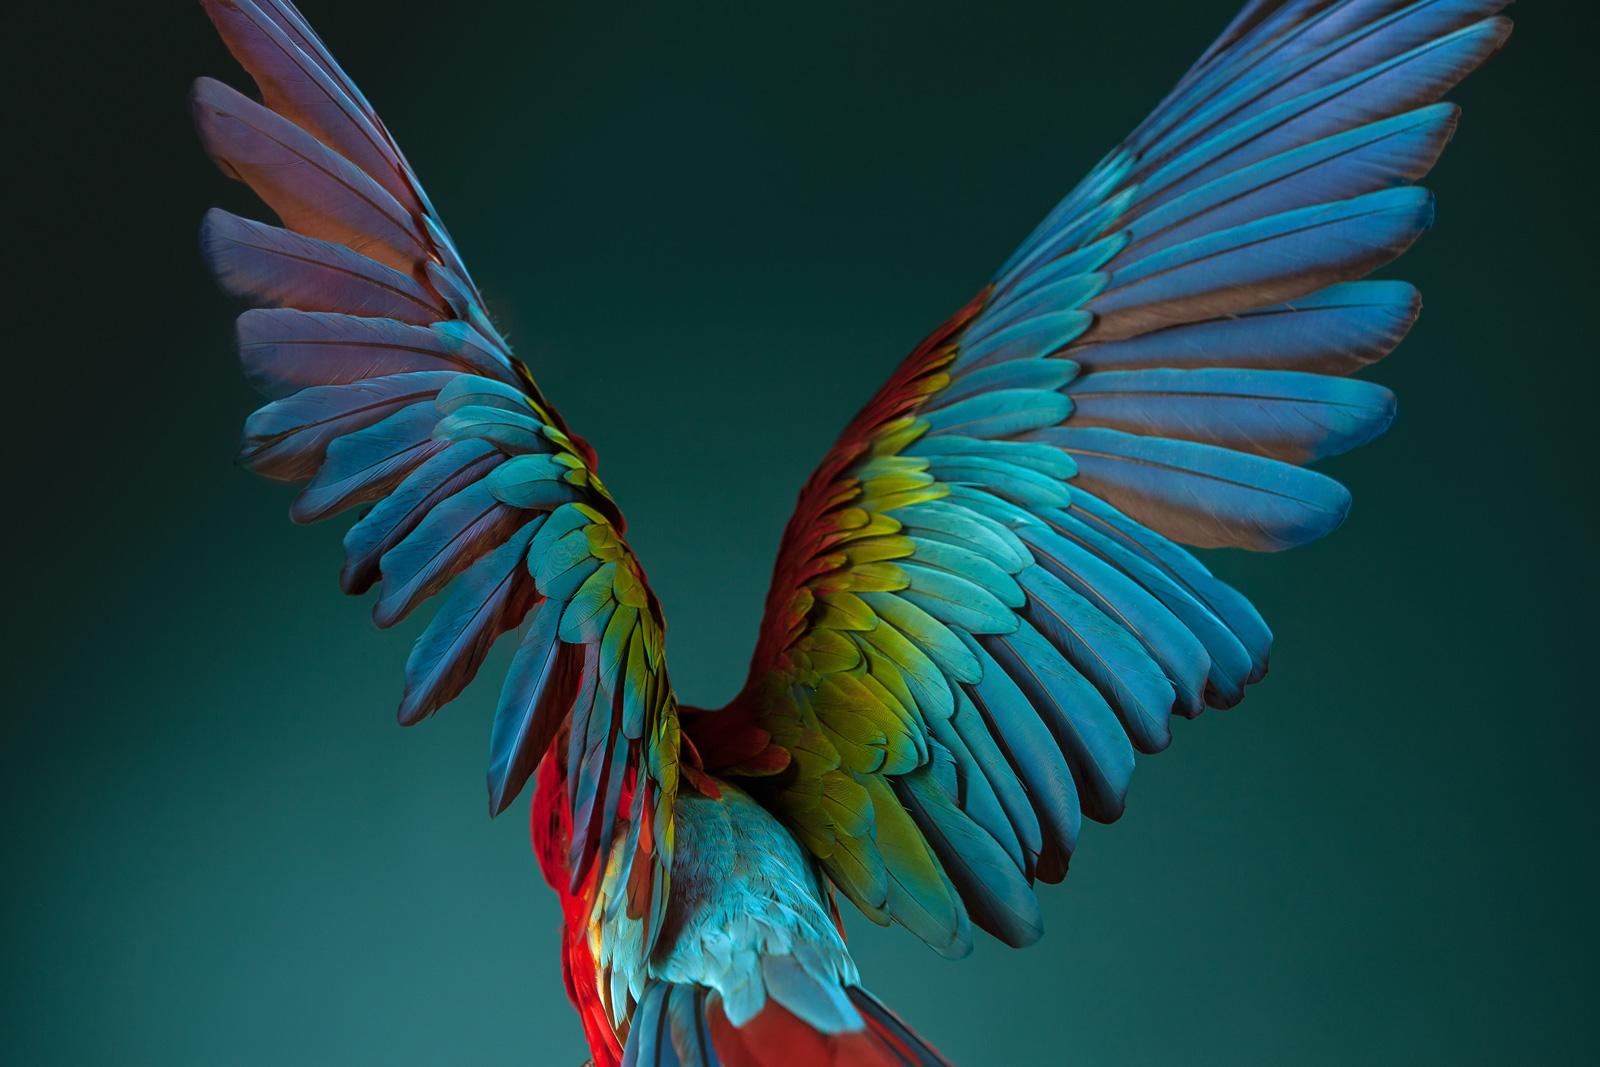 " Macaw #3 ” -  Signed limited edition fine art print